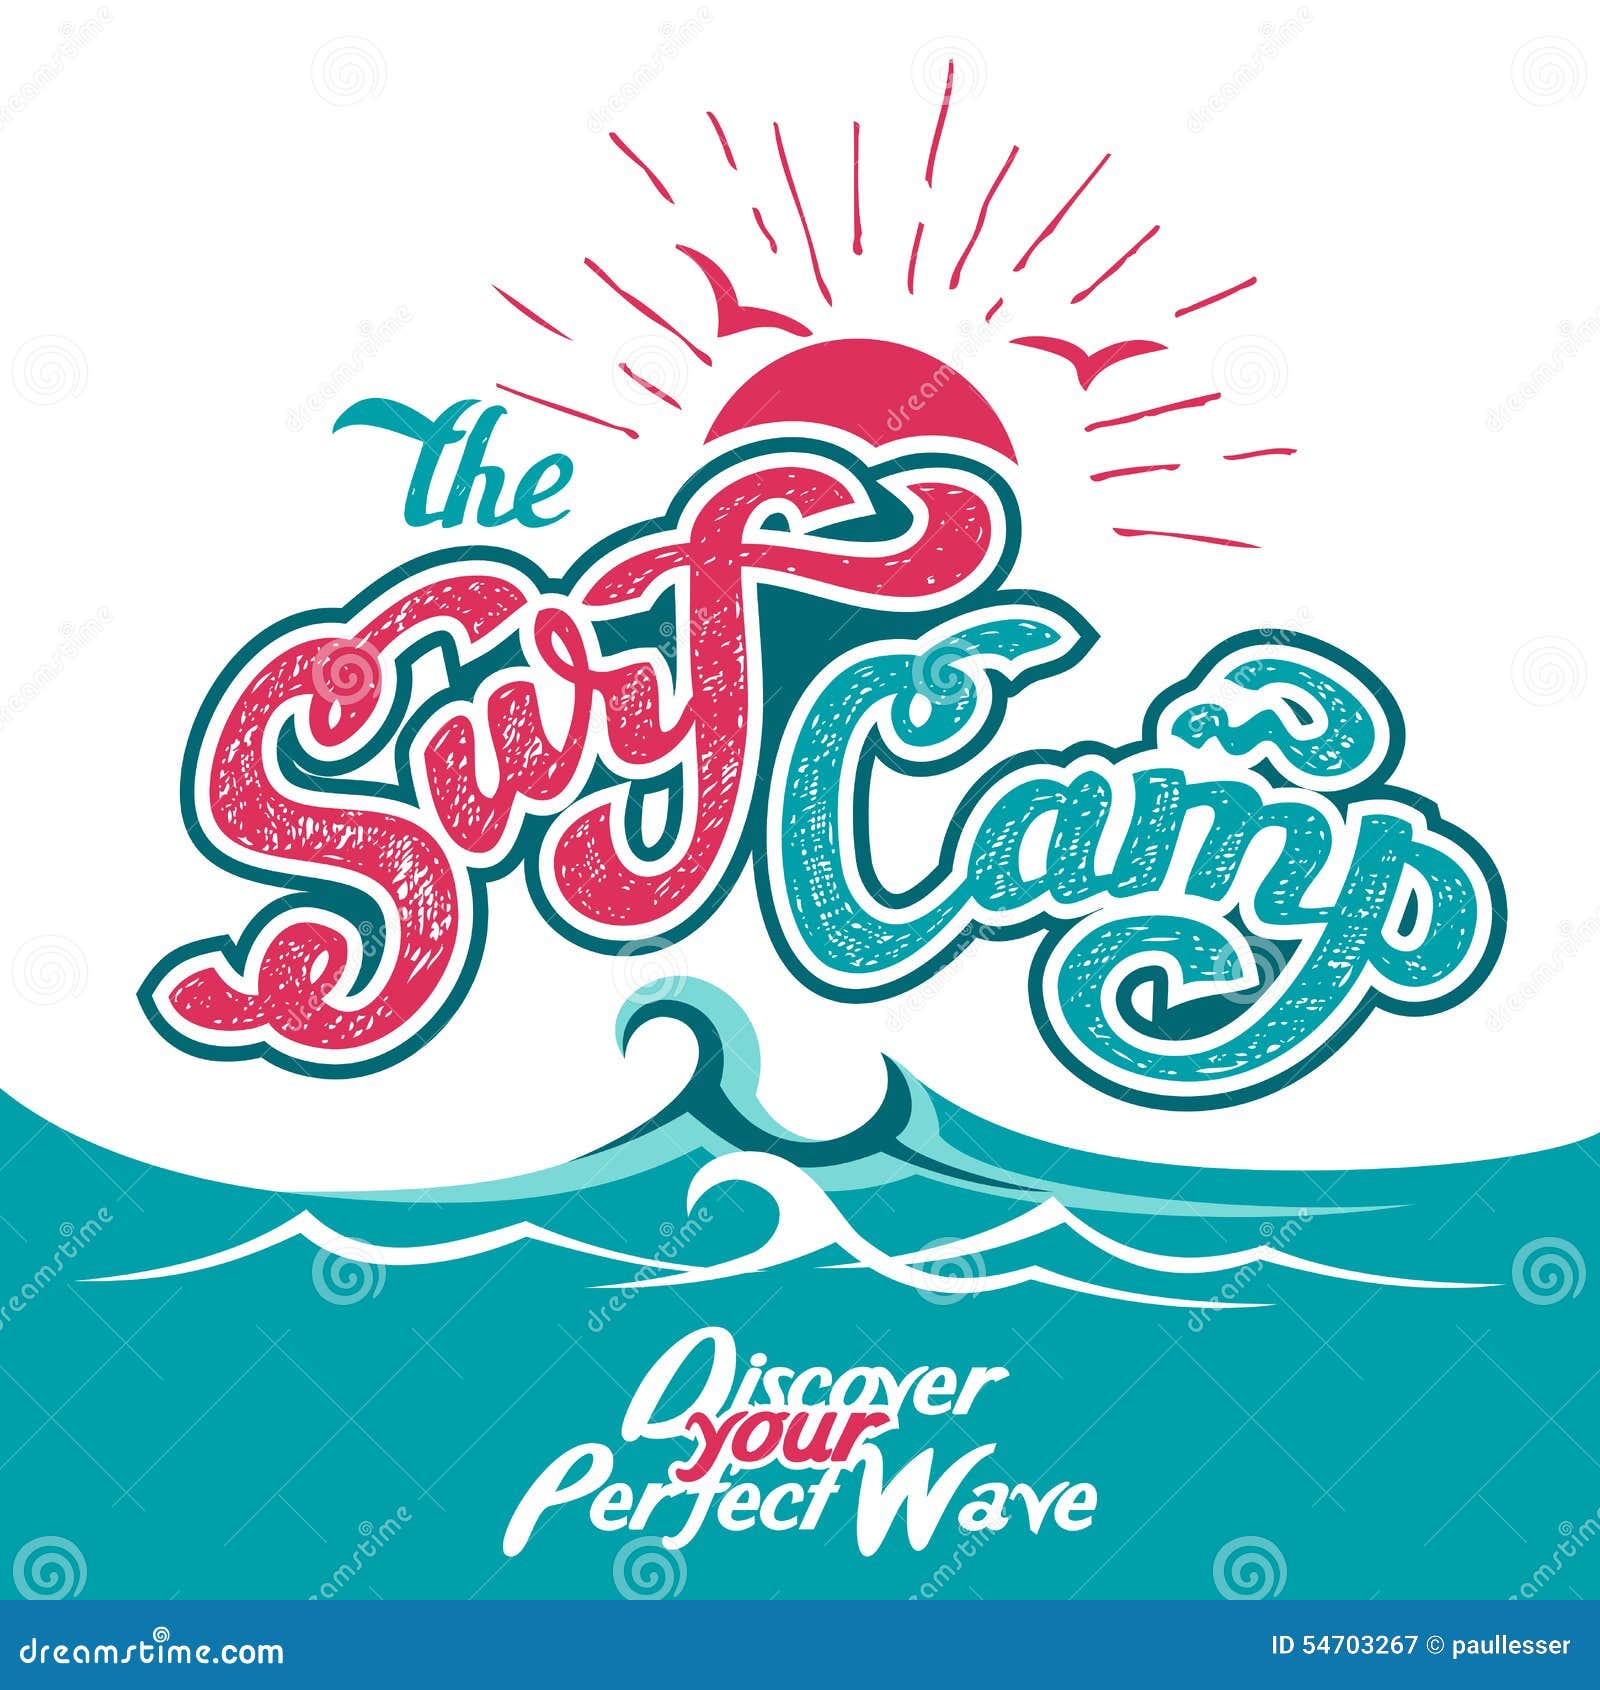 the surf camp hand lettering